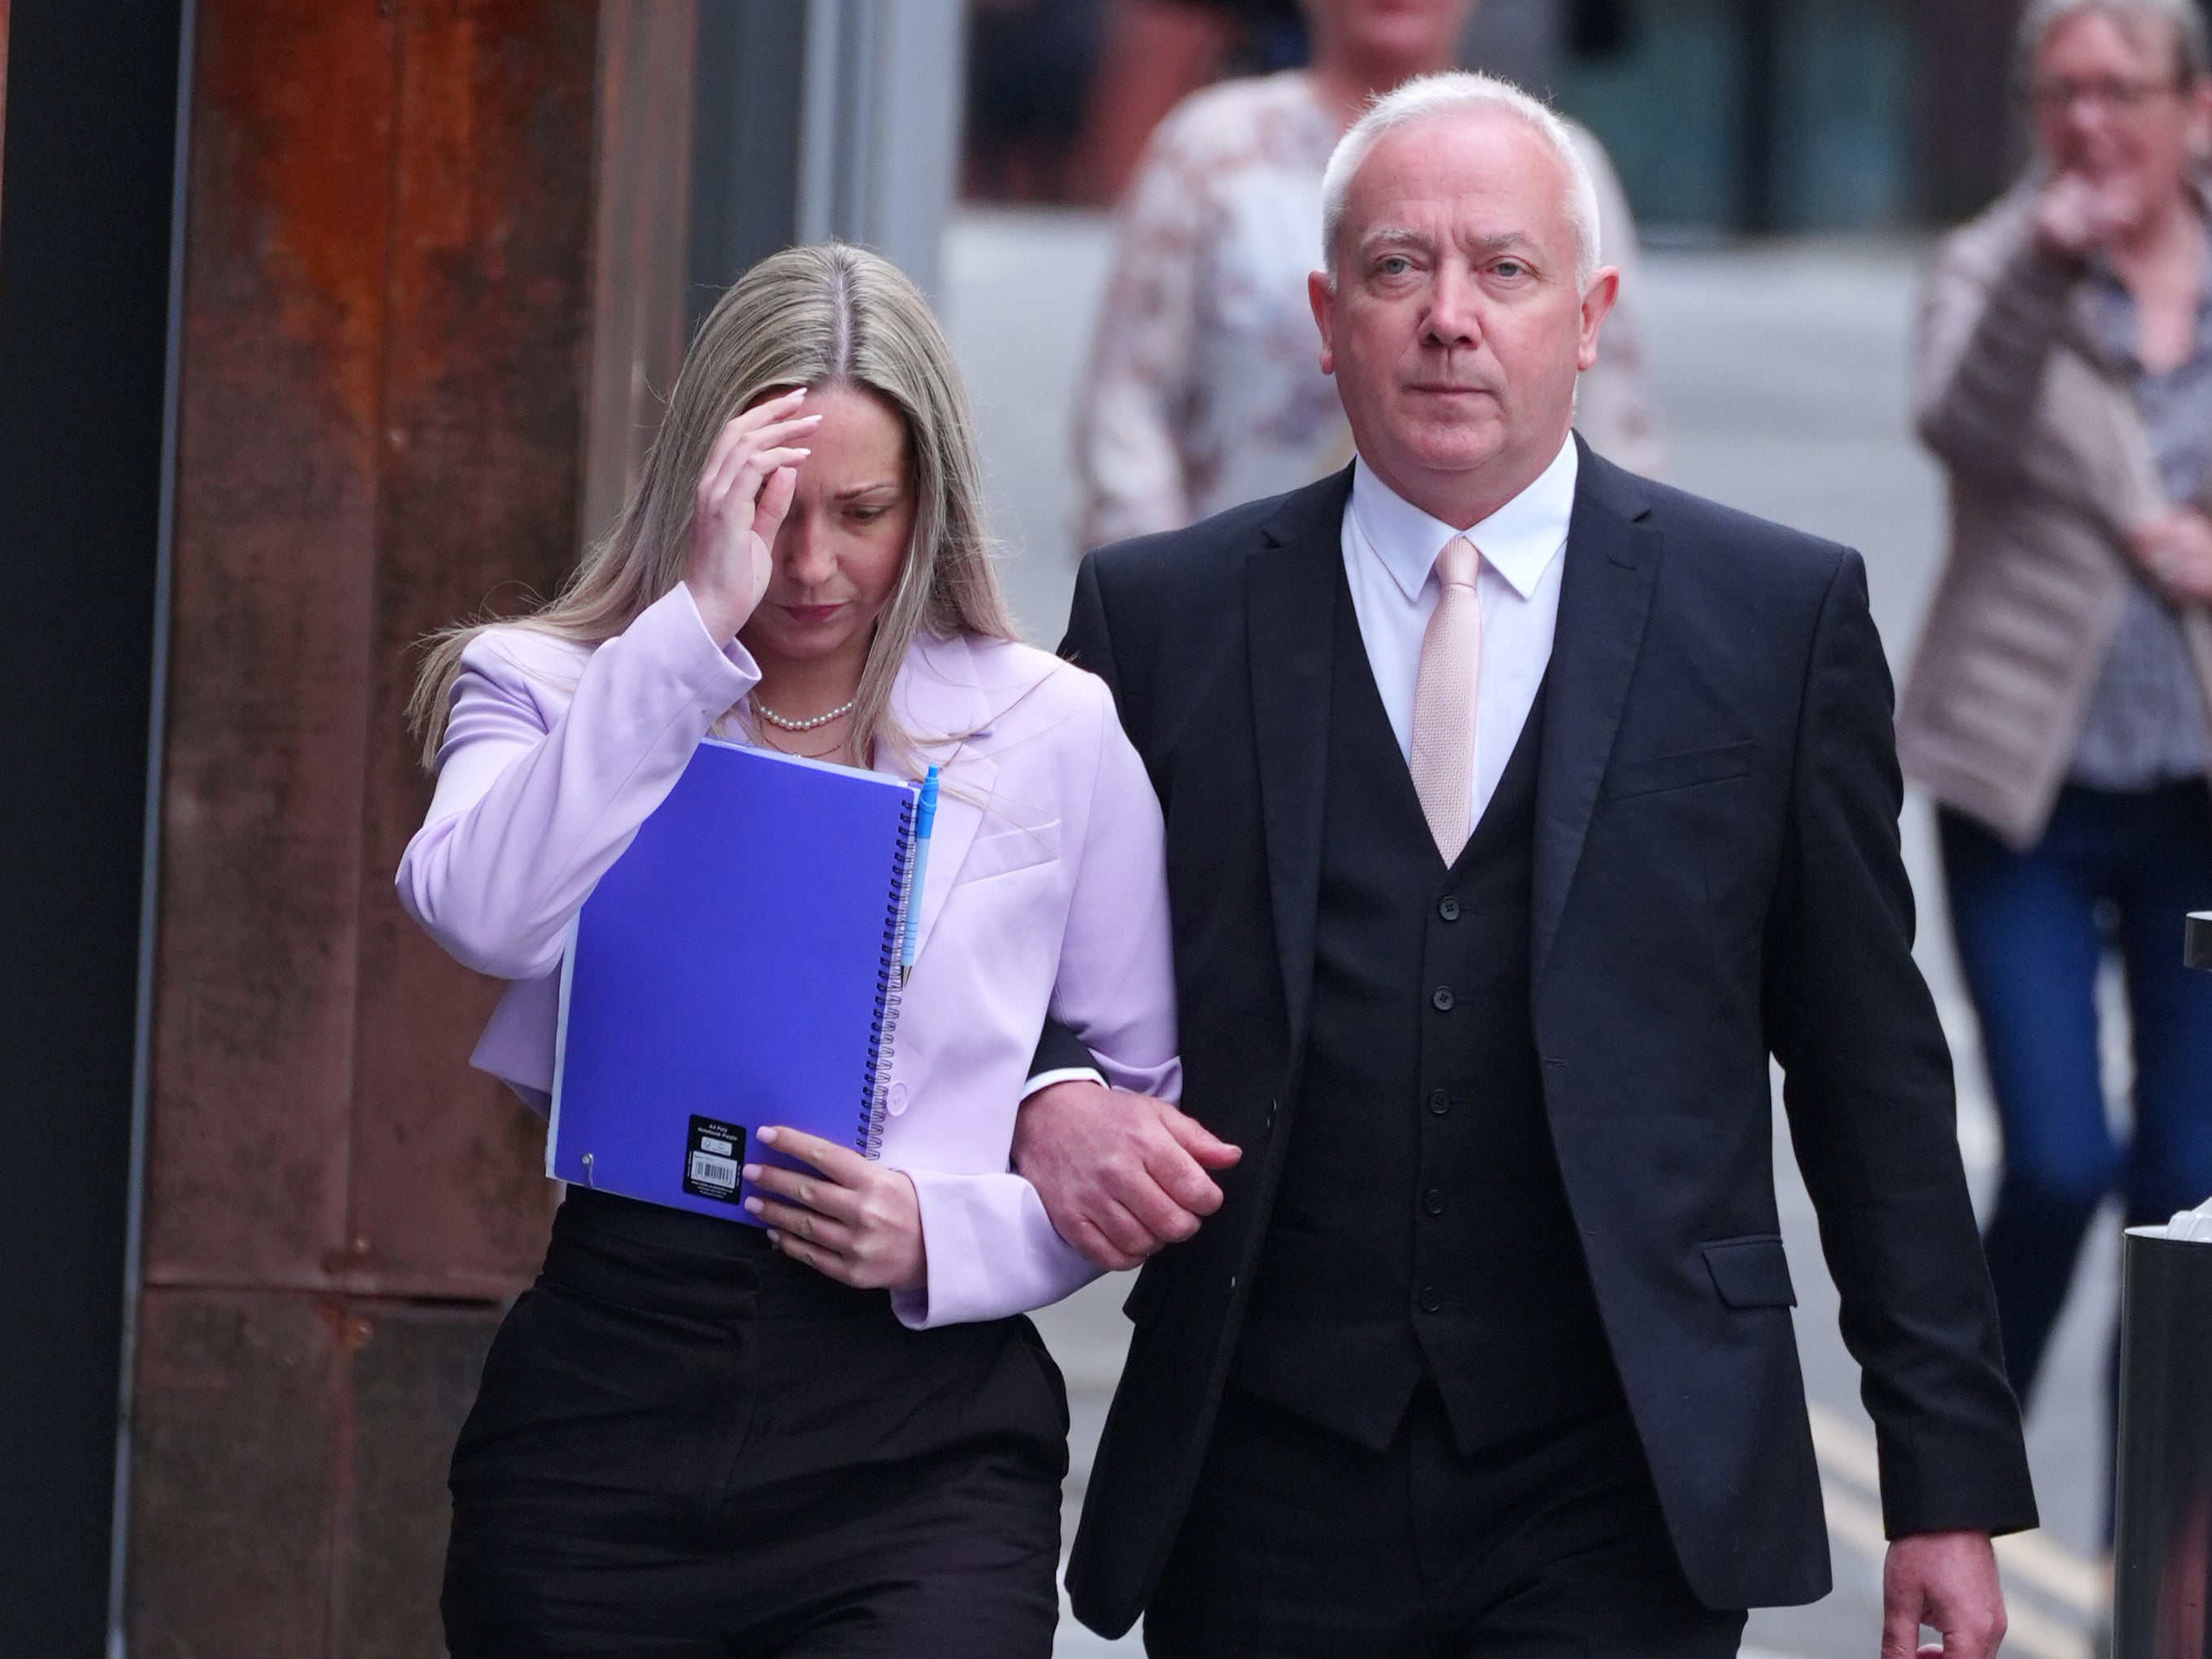 Joynes denies six counts of engaging in sexual activity with a child